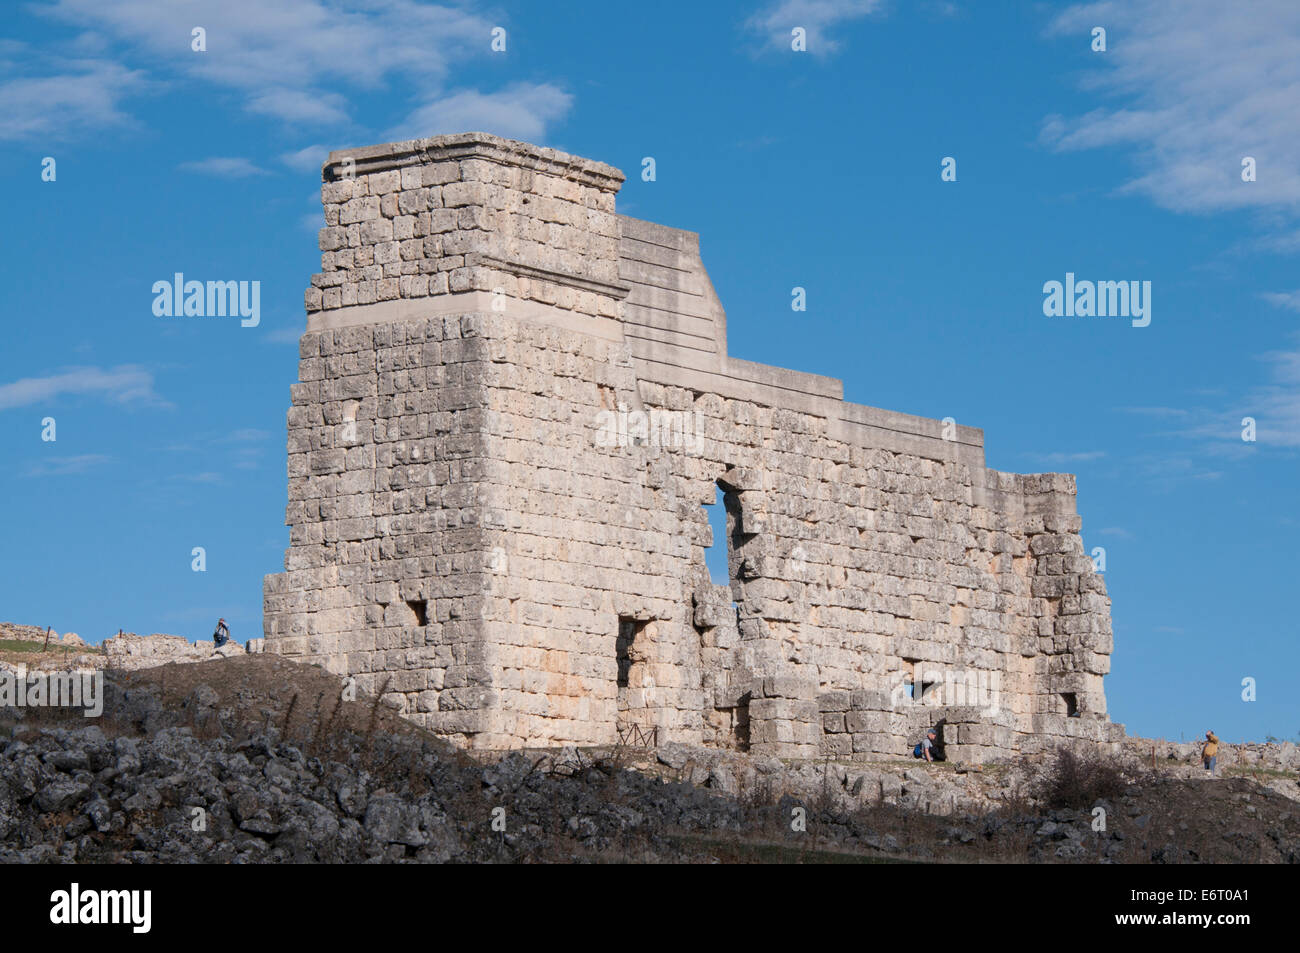 Standing remains of the amphitheatre at Acrinipo (Old Ronda) in southern Spain Stock Photo